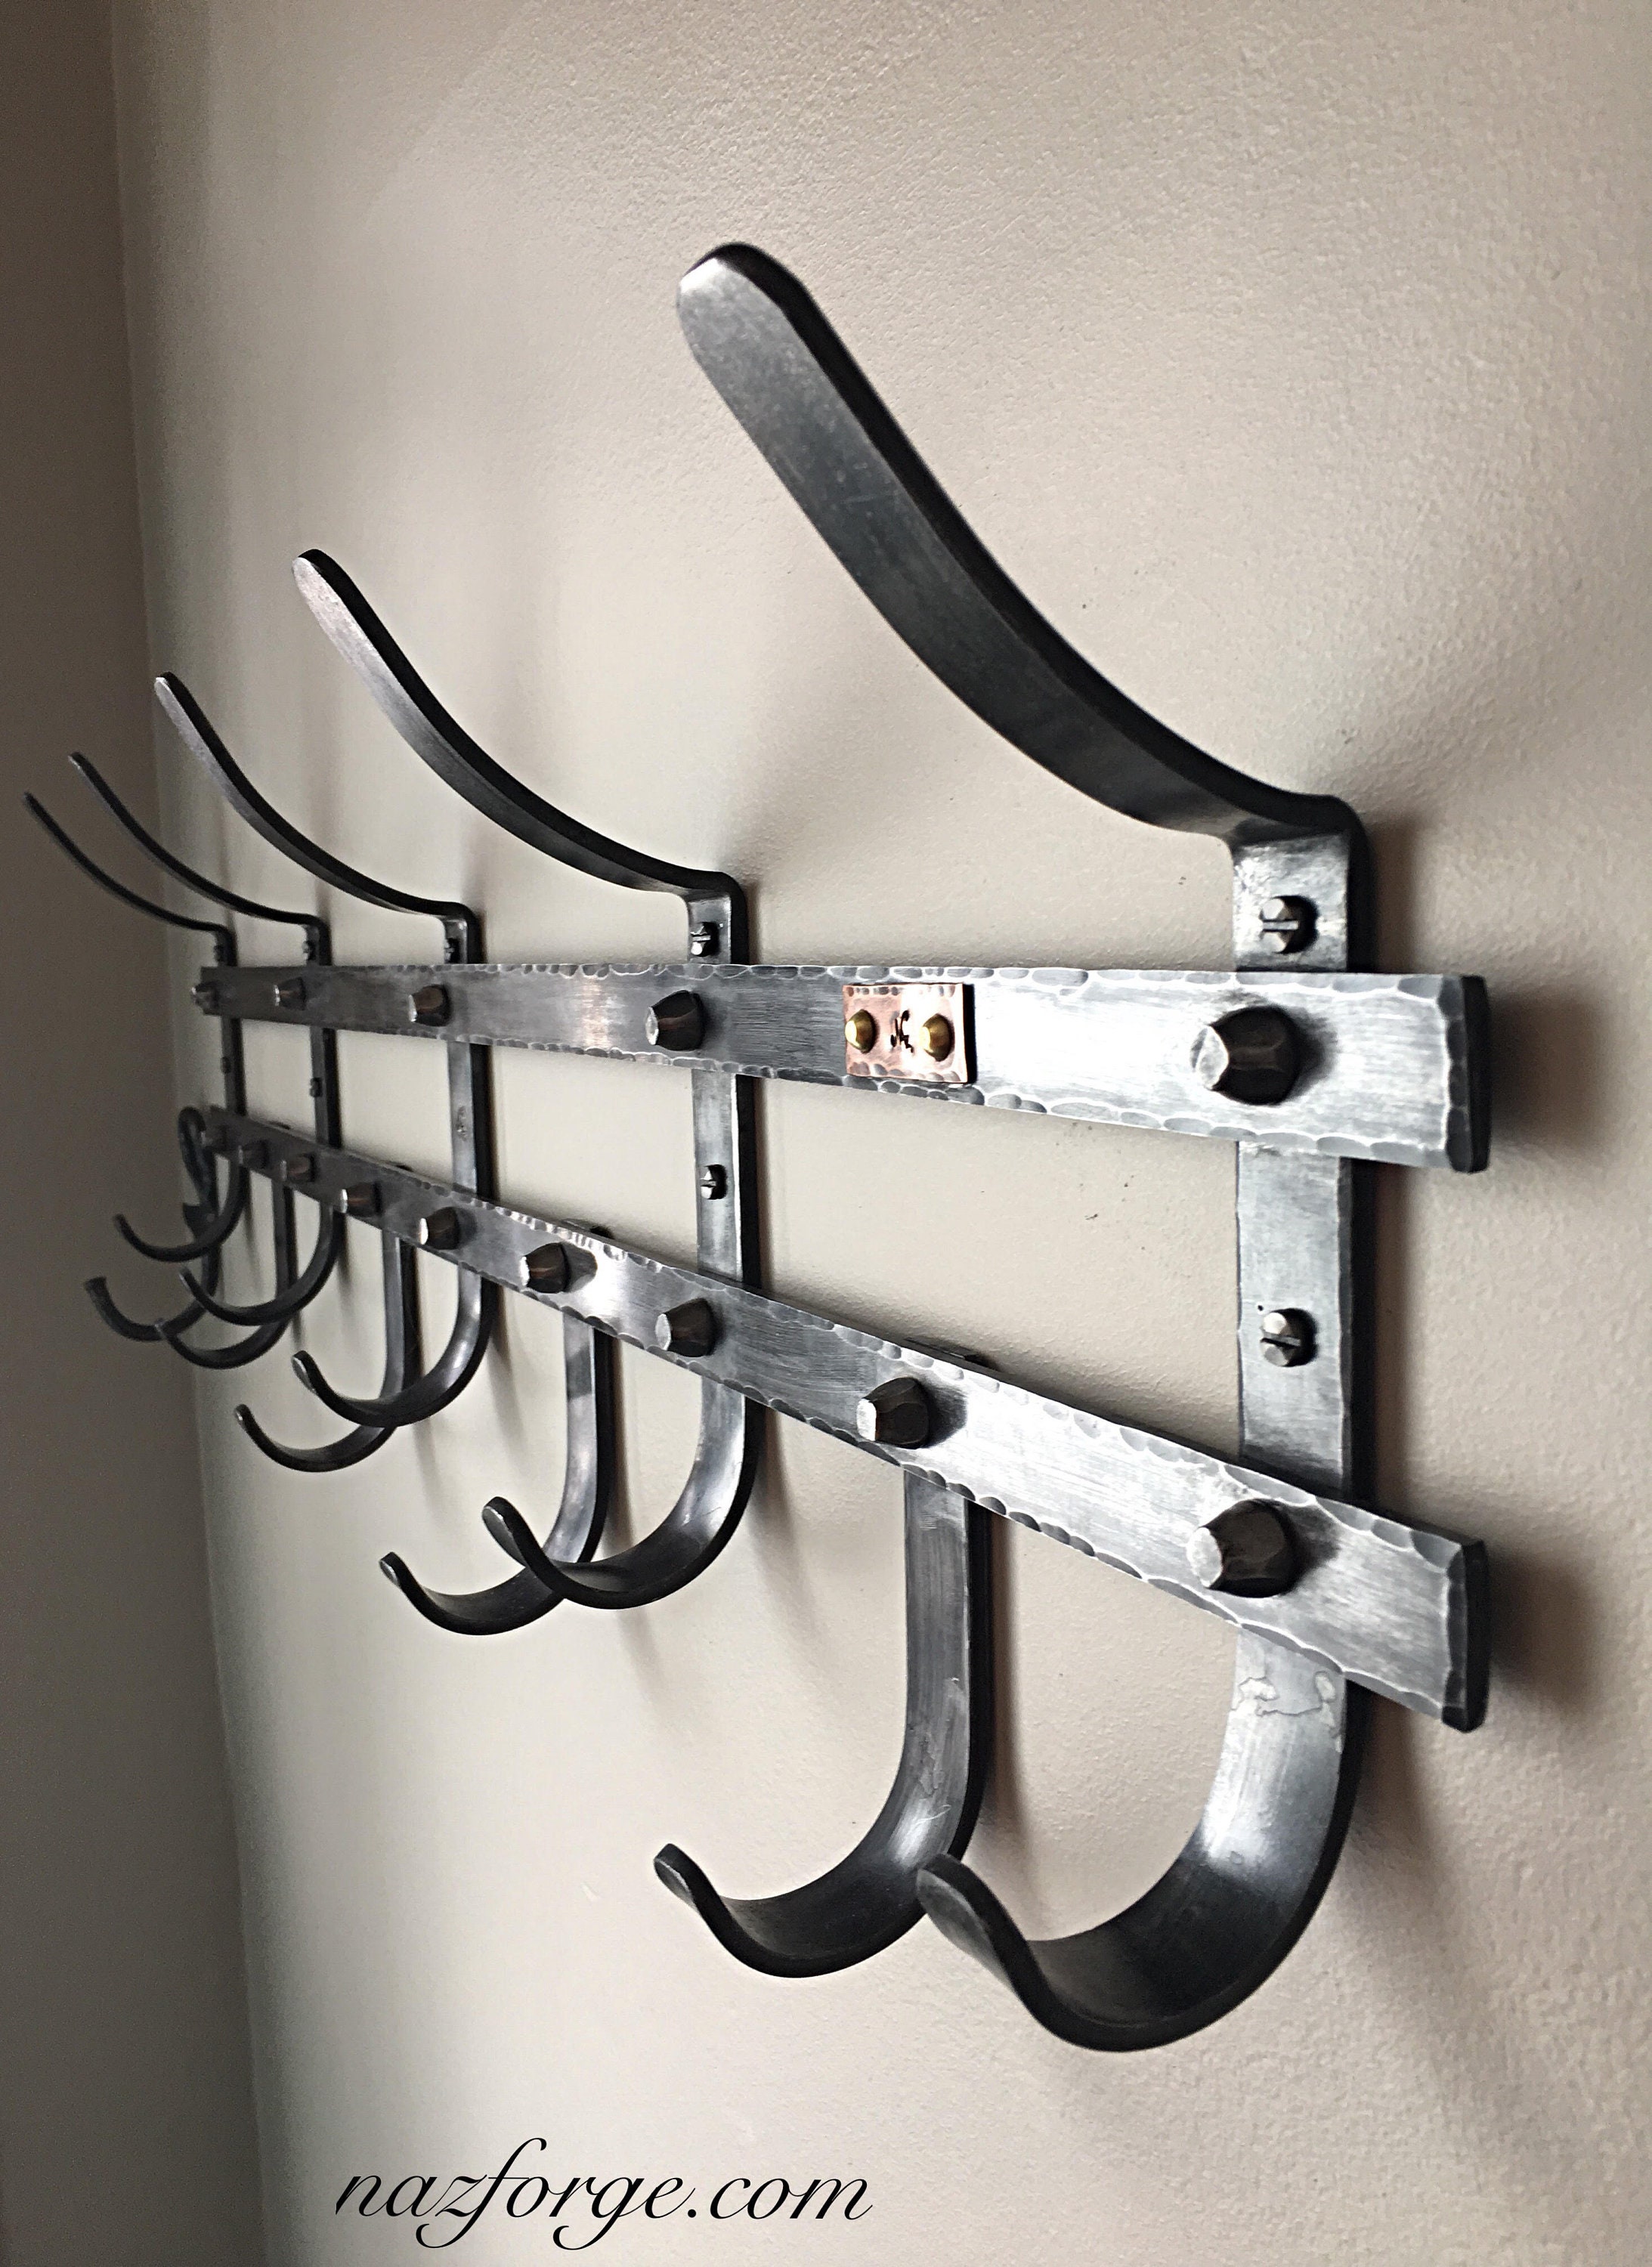 Iron Coat Rack, Vintage Hand Forged metal coat hook rail, Wall Mounted  with 6 Hooks, rack peg hanger distressed patina iron finish, Rustic Home  Organization, Wrought iron